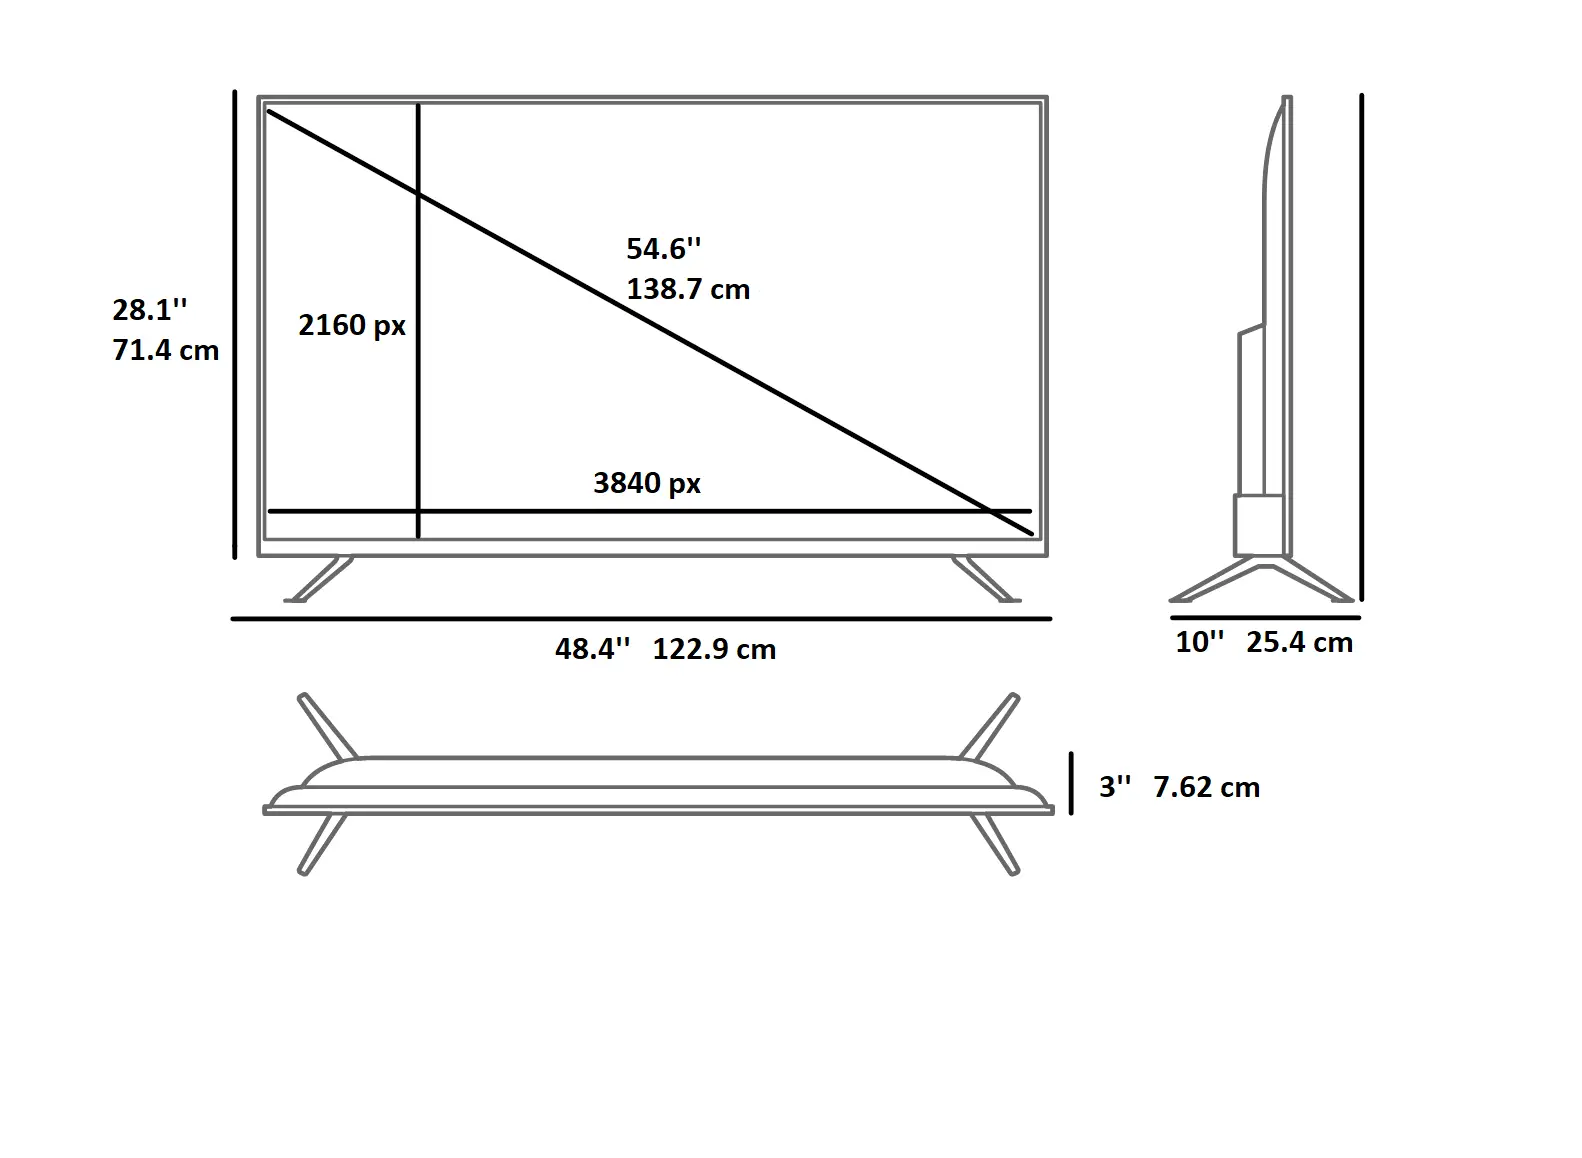 55 Inch Tv Dimensions 55 Tv Measurements 55 Inches Tv Viewing Distance Specs Inch Dimensions